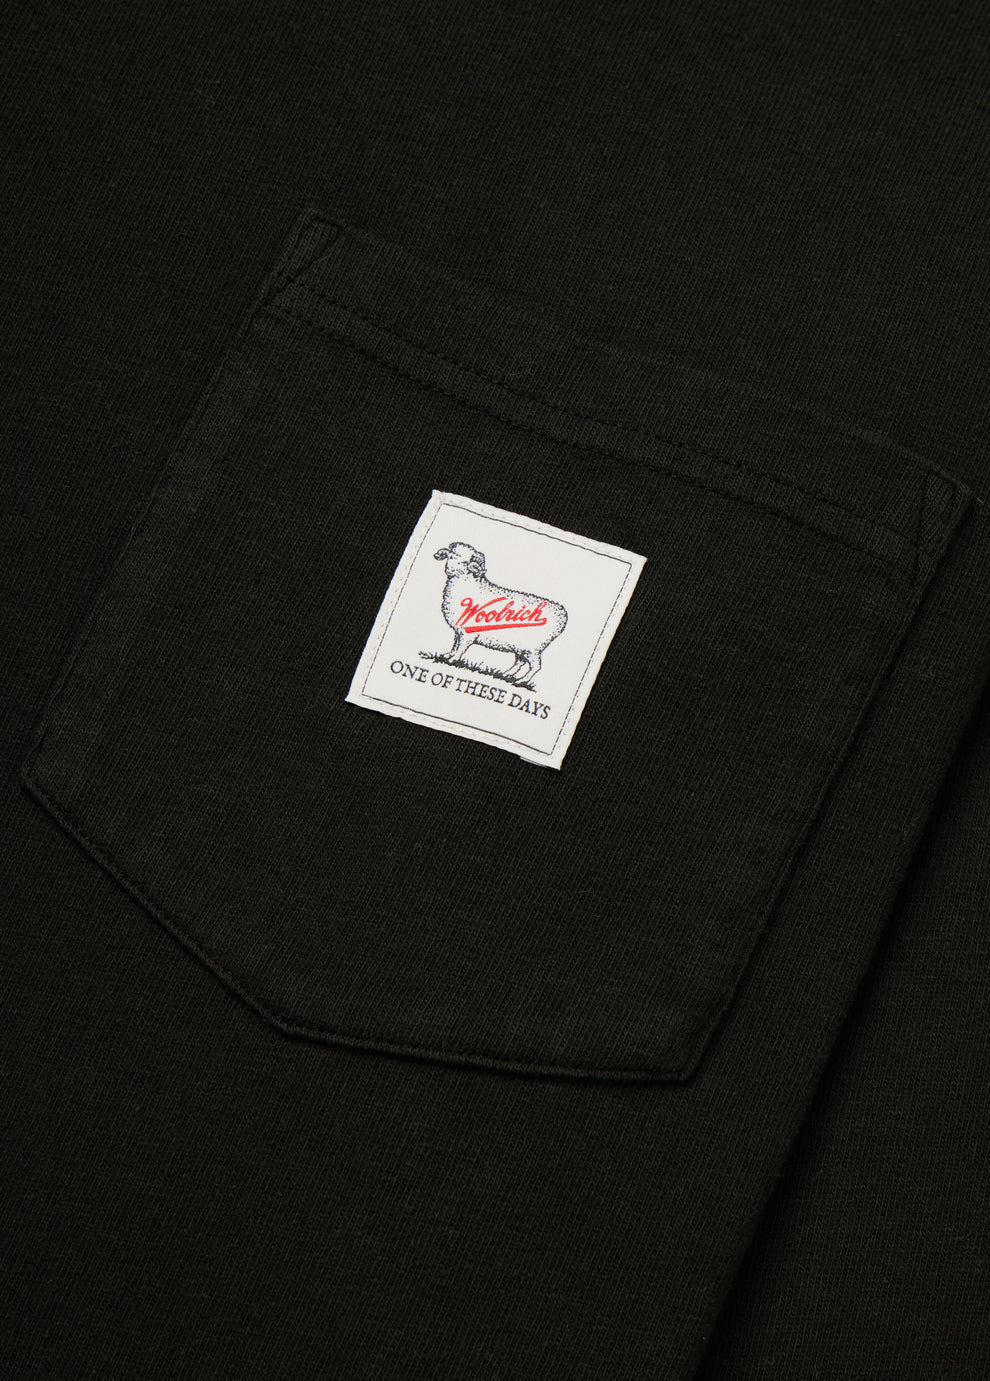 One of These Days X Woolrich - Washed Black LS Pocket Tee